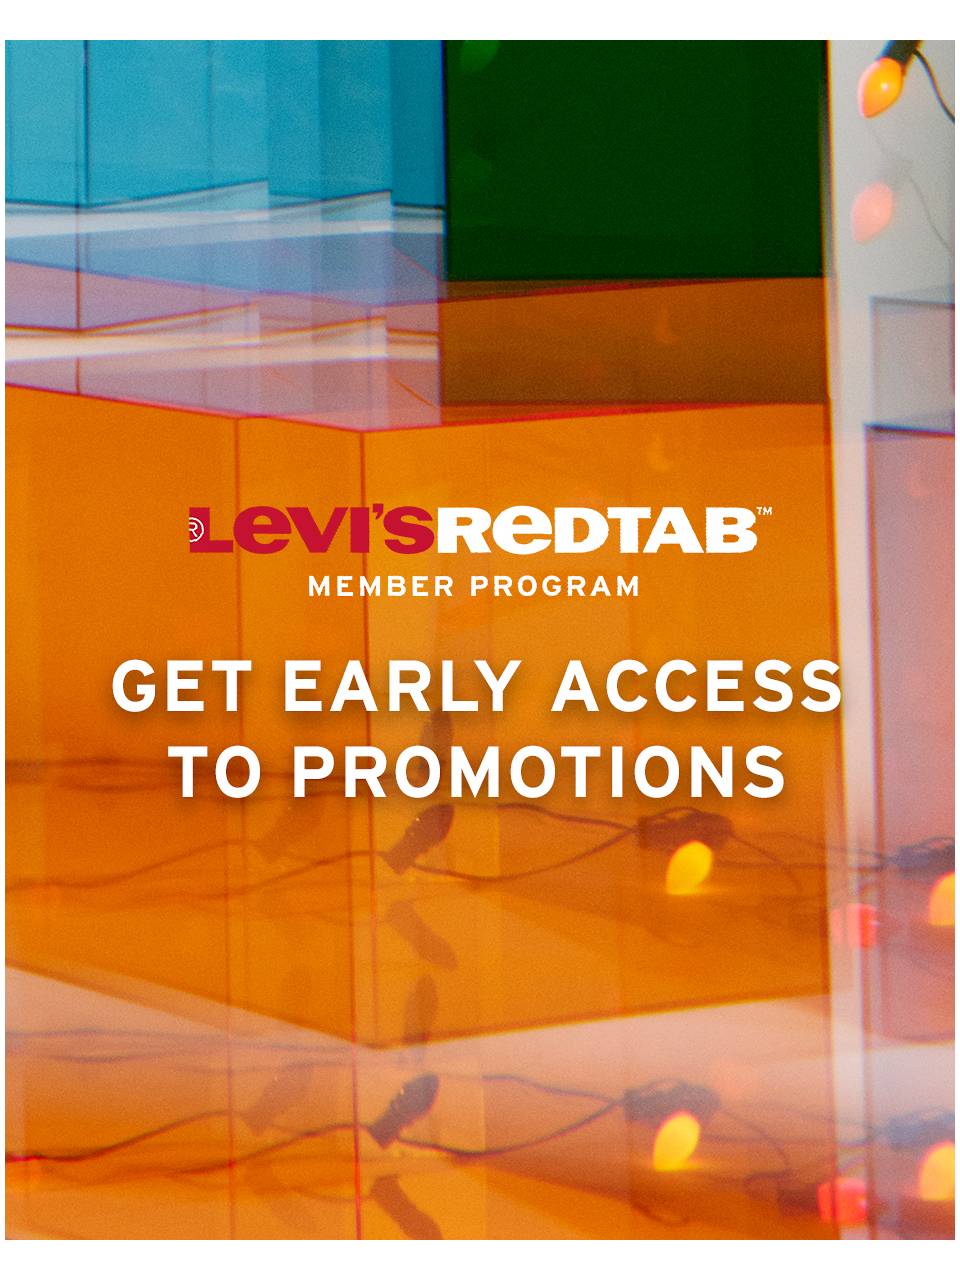 Image of Red Tab Promo.